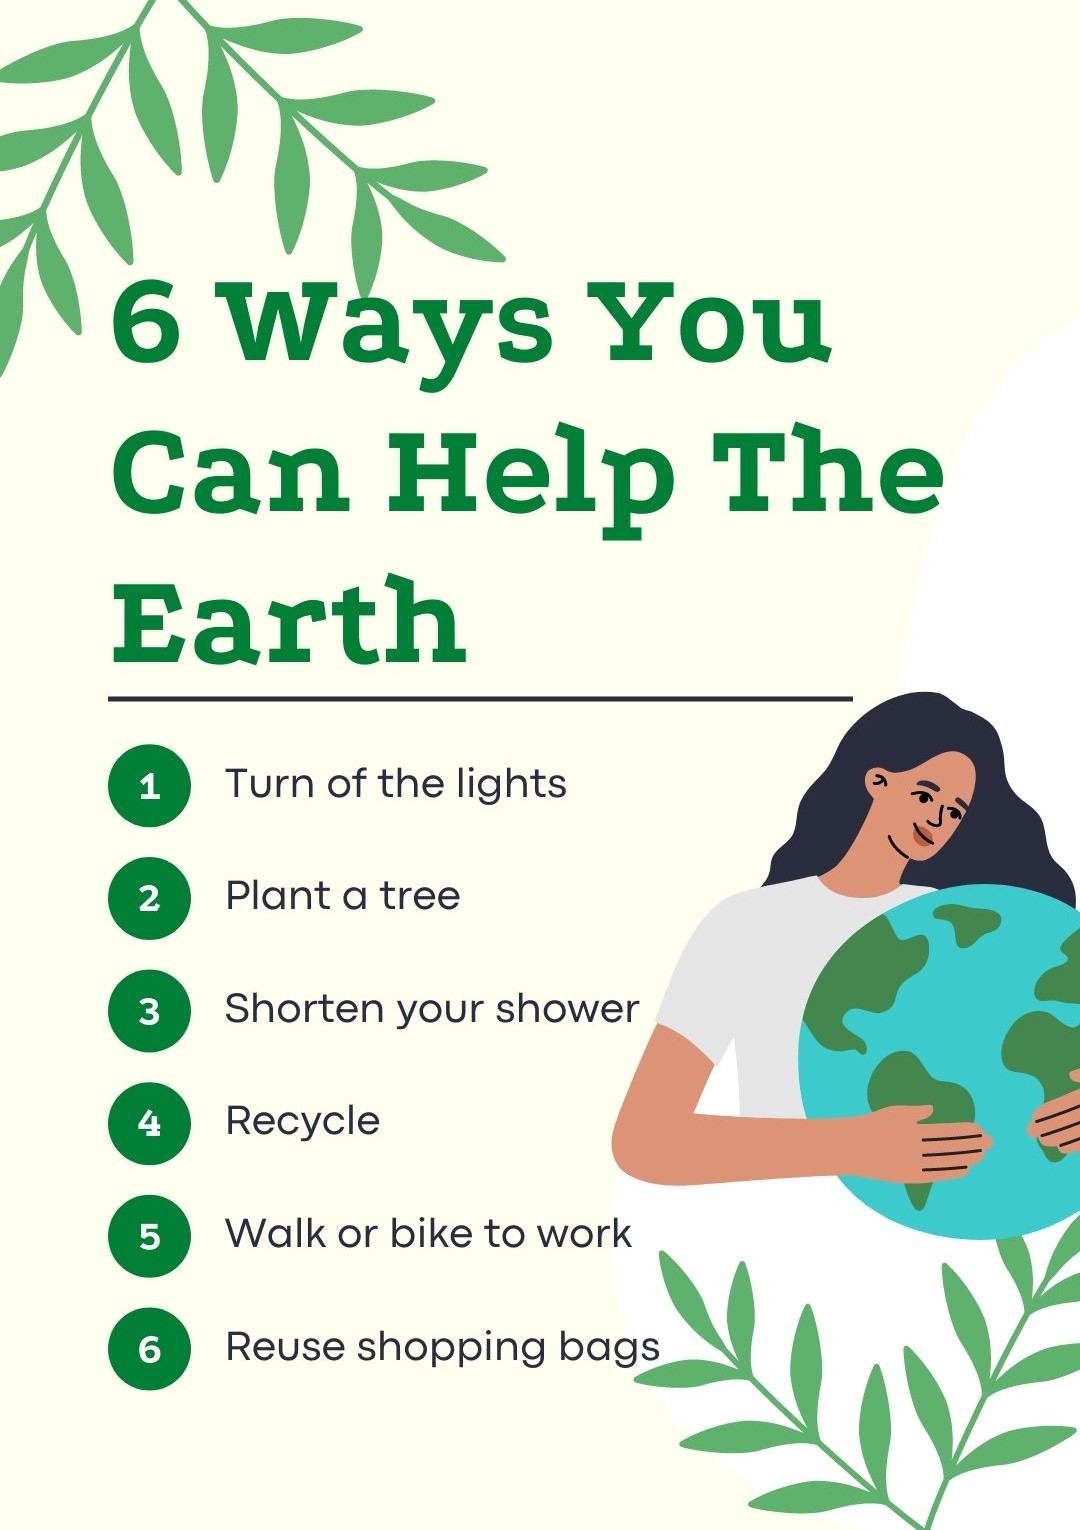 Earth Day Tips